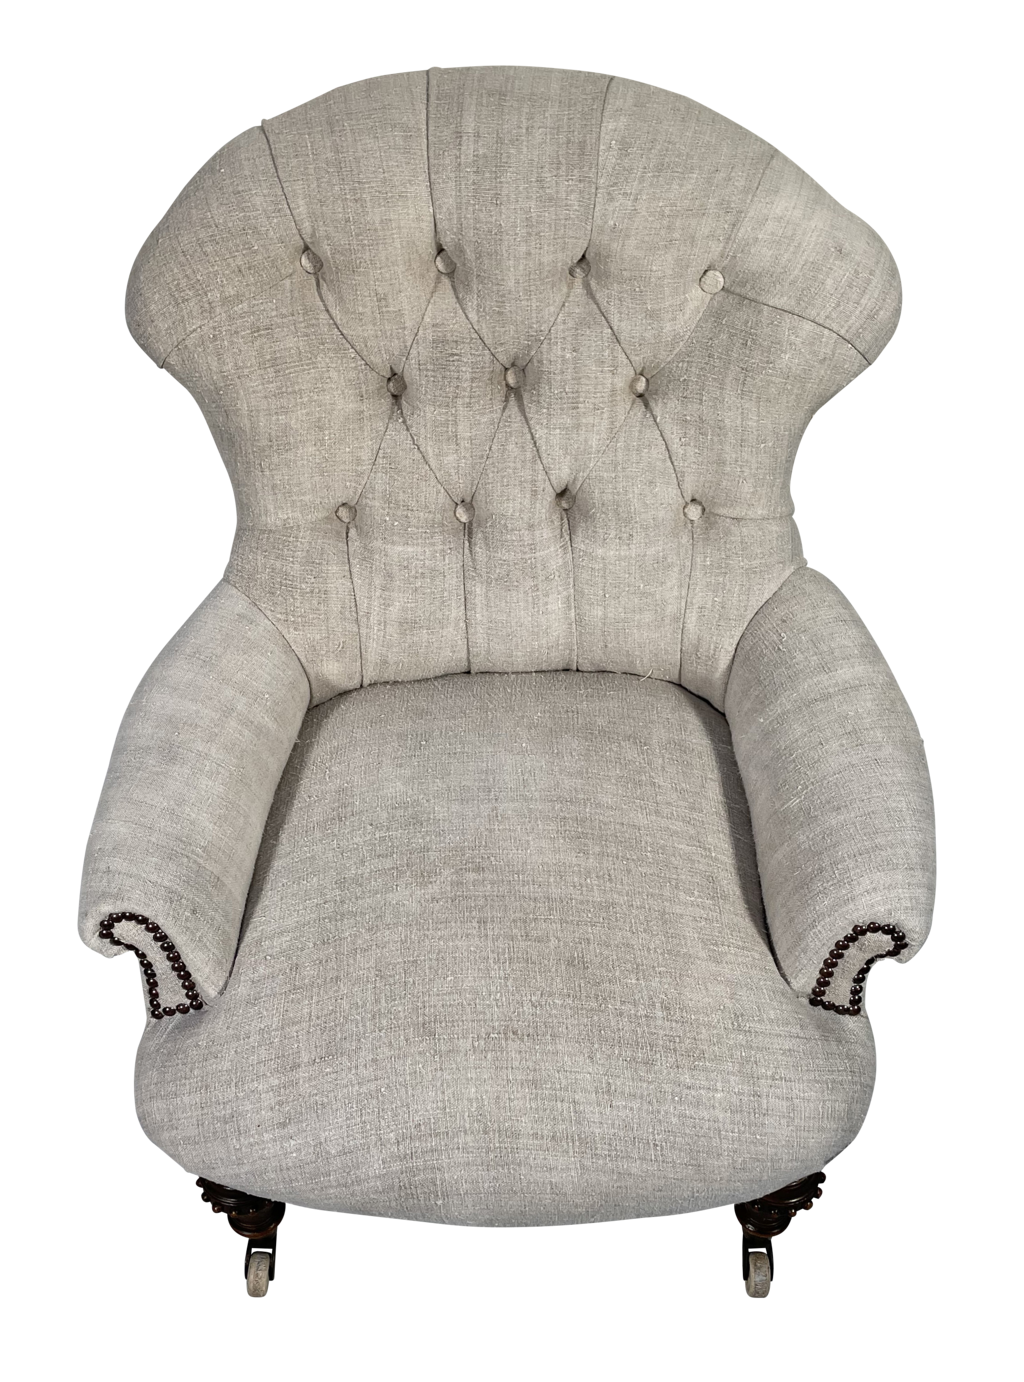 Early Victorian Button Back Armchair on Turned Mahogany Legs Upholstered in Antique French Hemp Linen